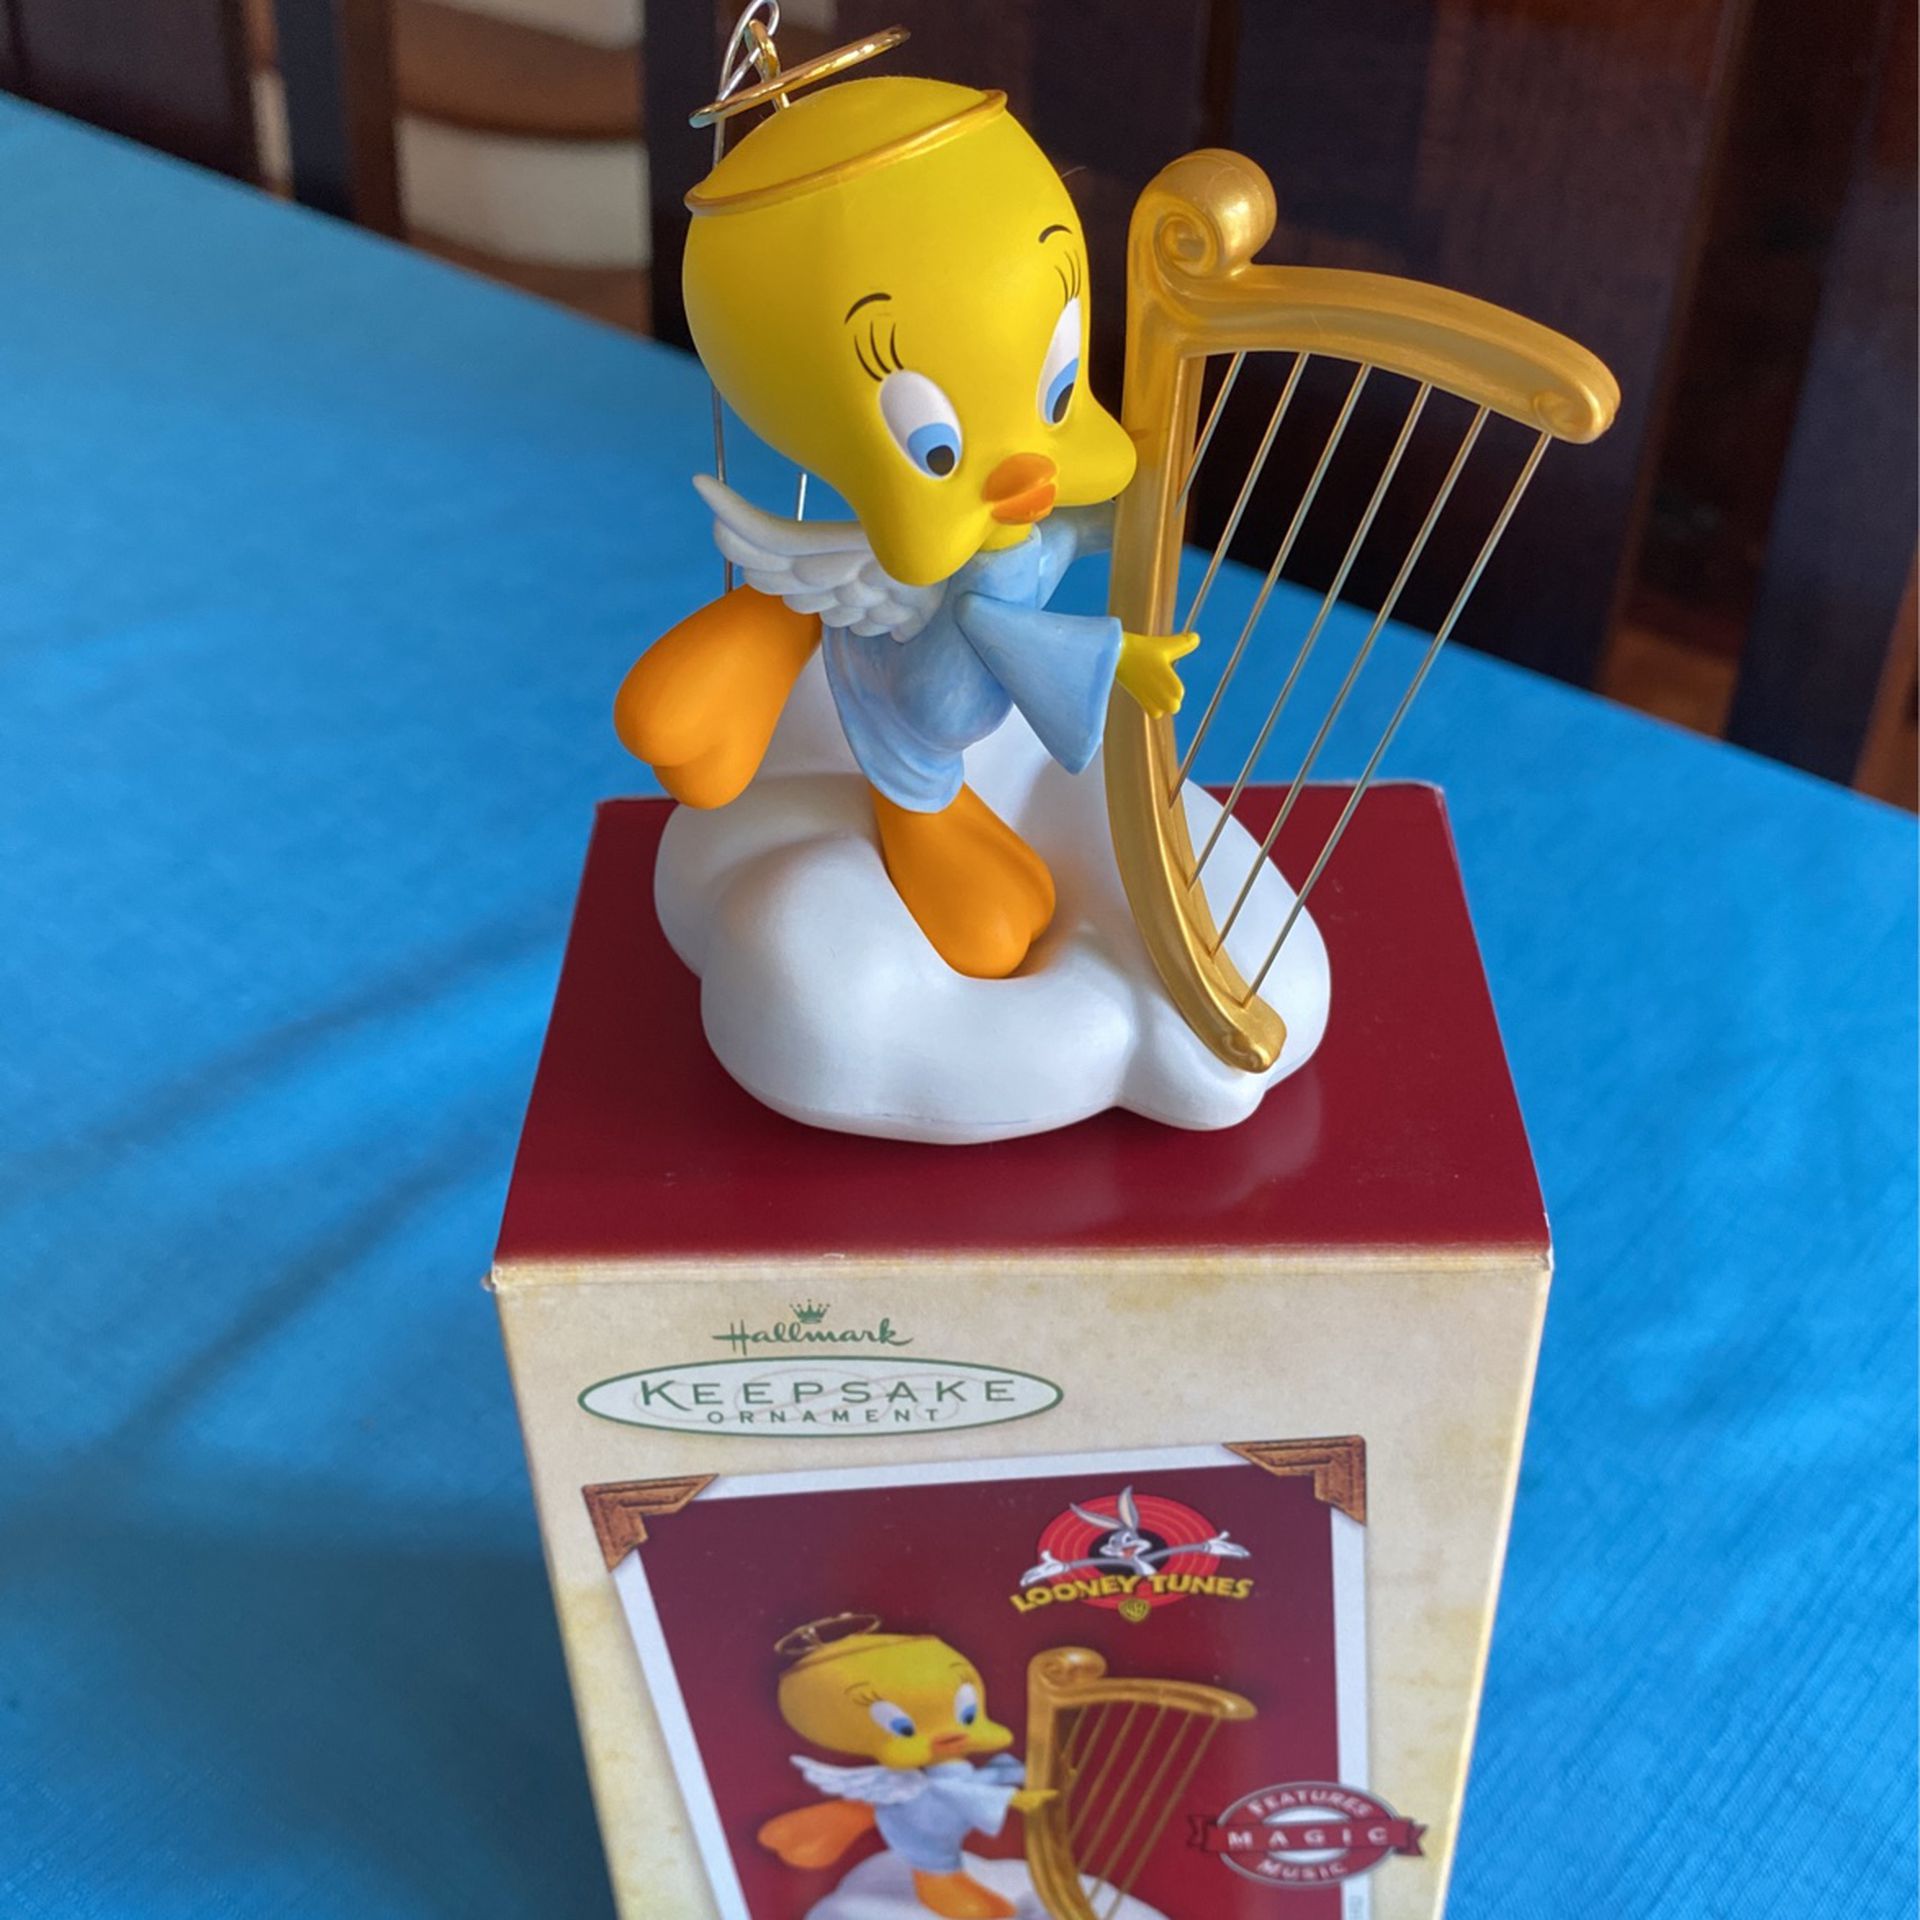 Hallmark keepsake Christmas ornament Tweetie plays an angel Looney Tunes in the original box complete with collectible card